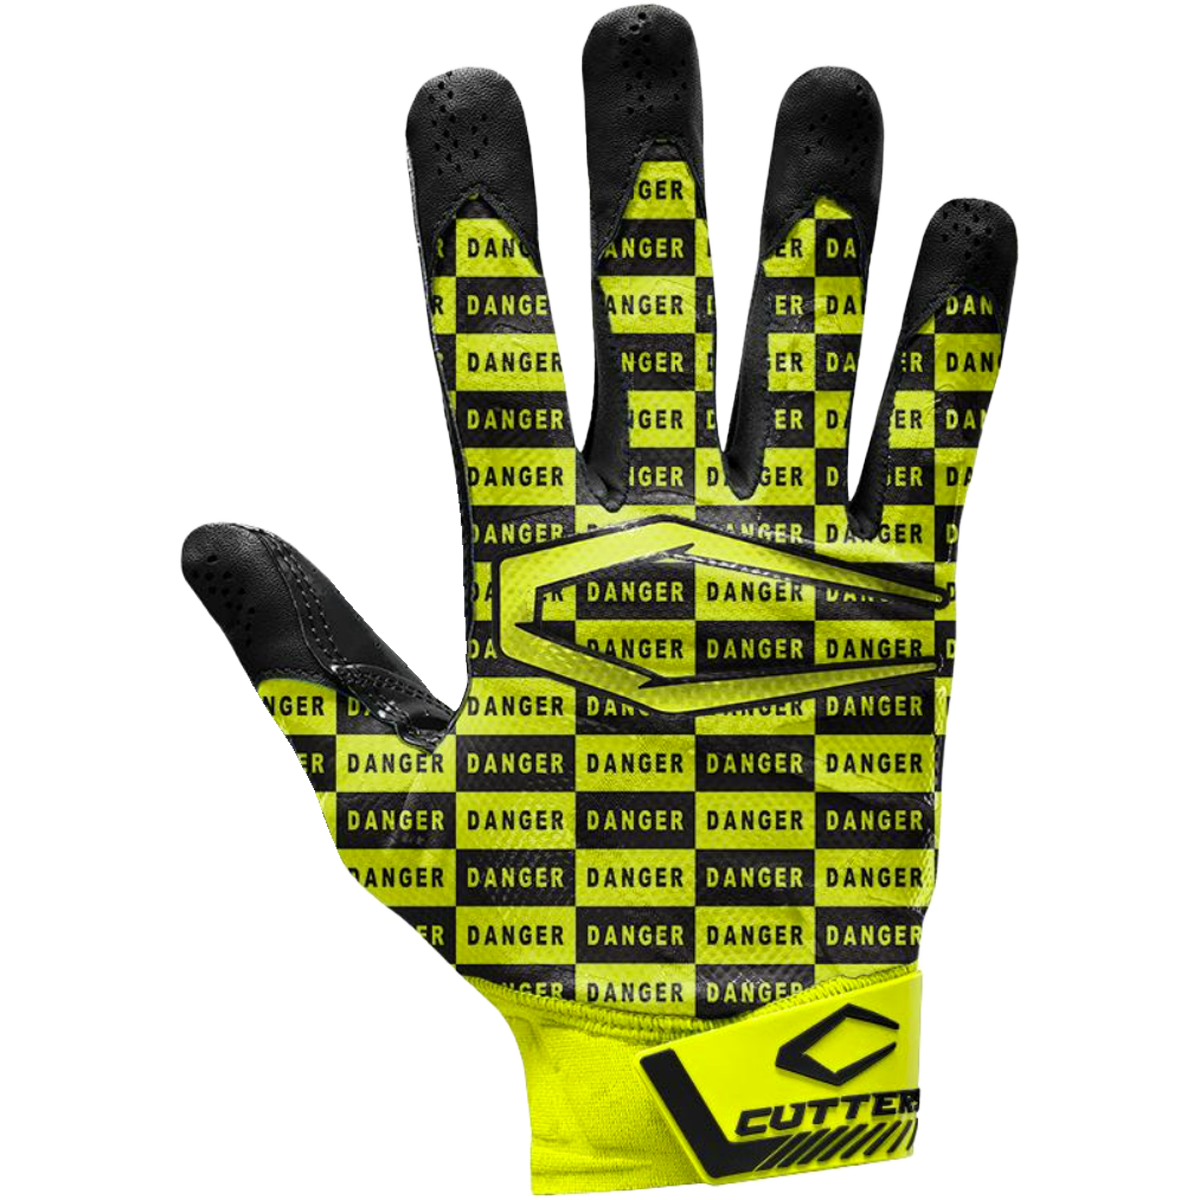 CUTTERS REV PRO FOOTBALL GLOVES SPECIAL EDITION